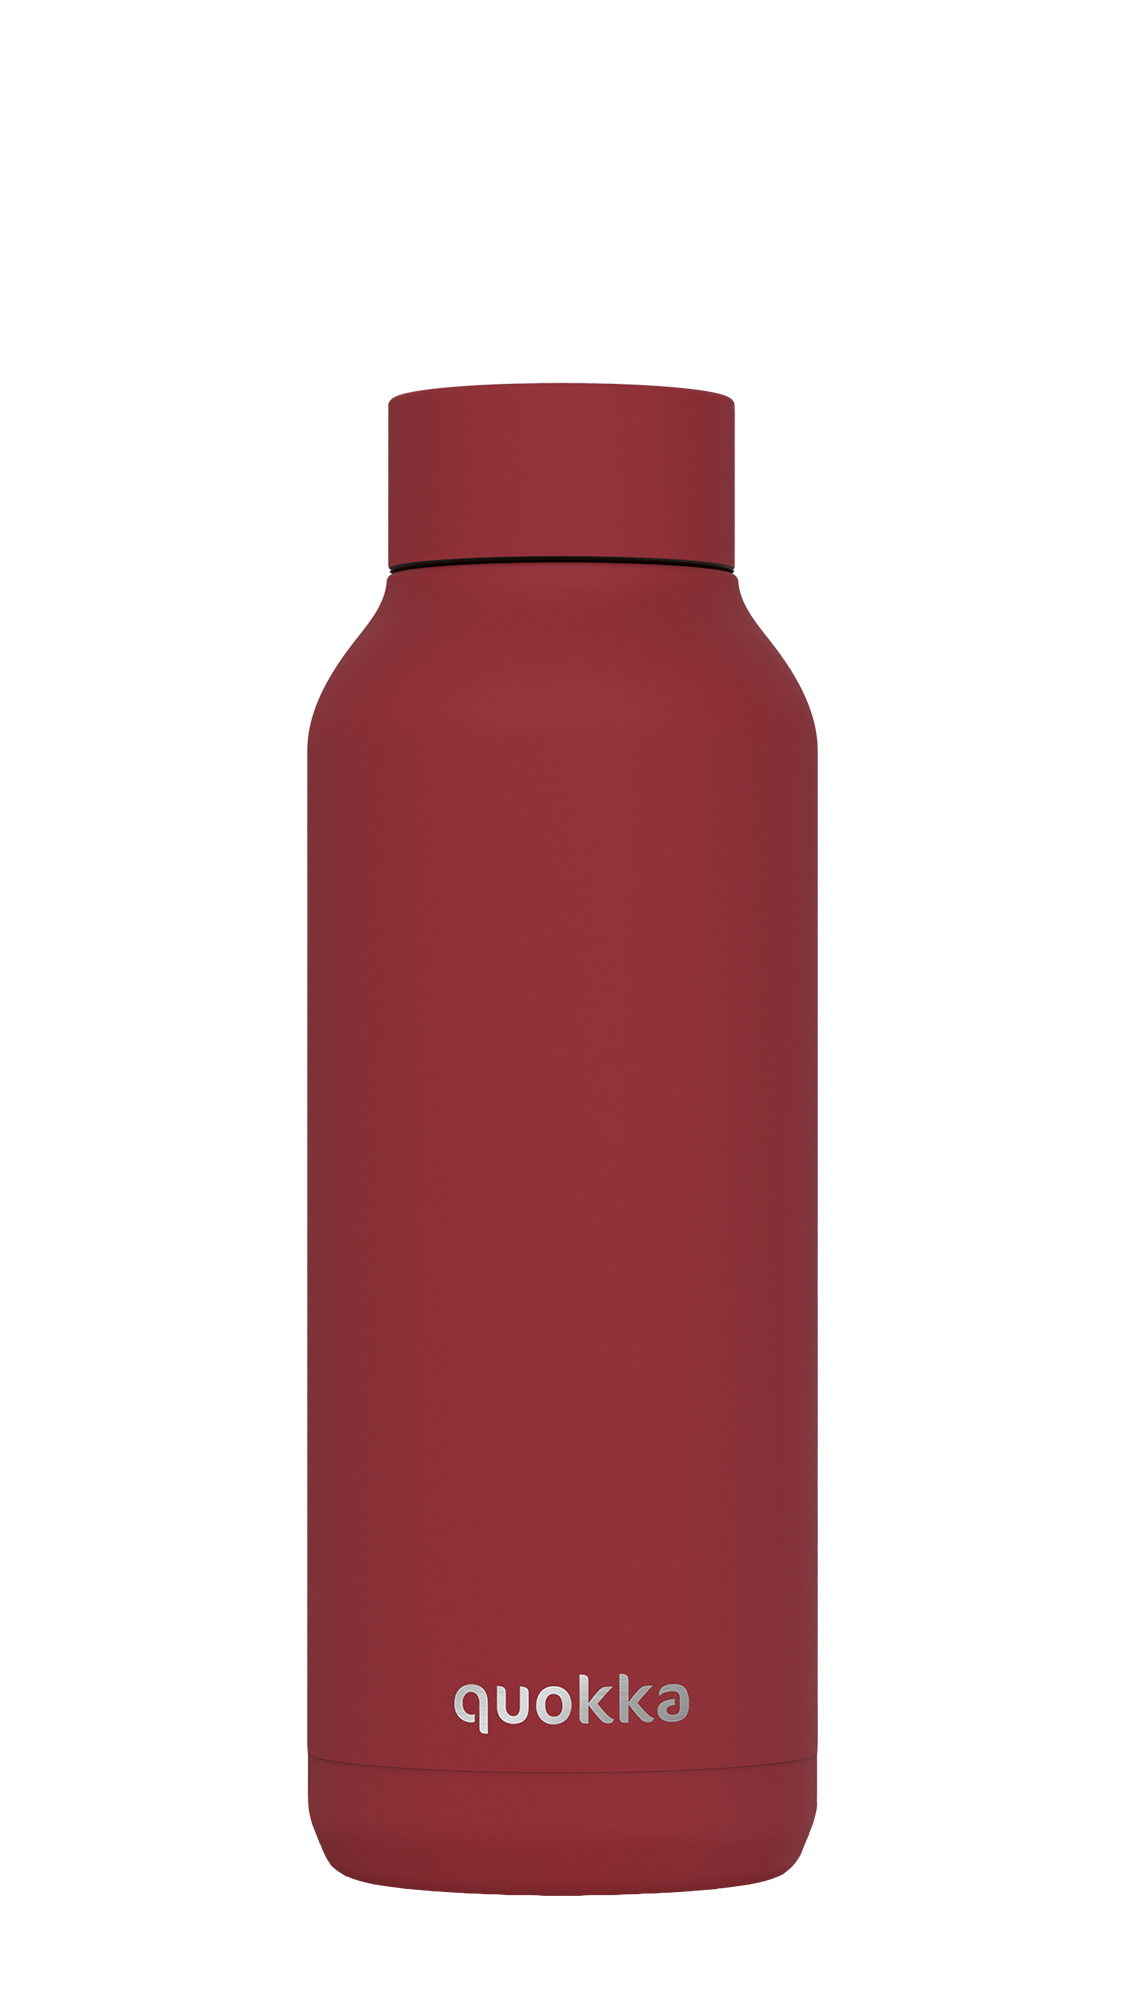 SOLID - FIREBRICK RED 510 ML